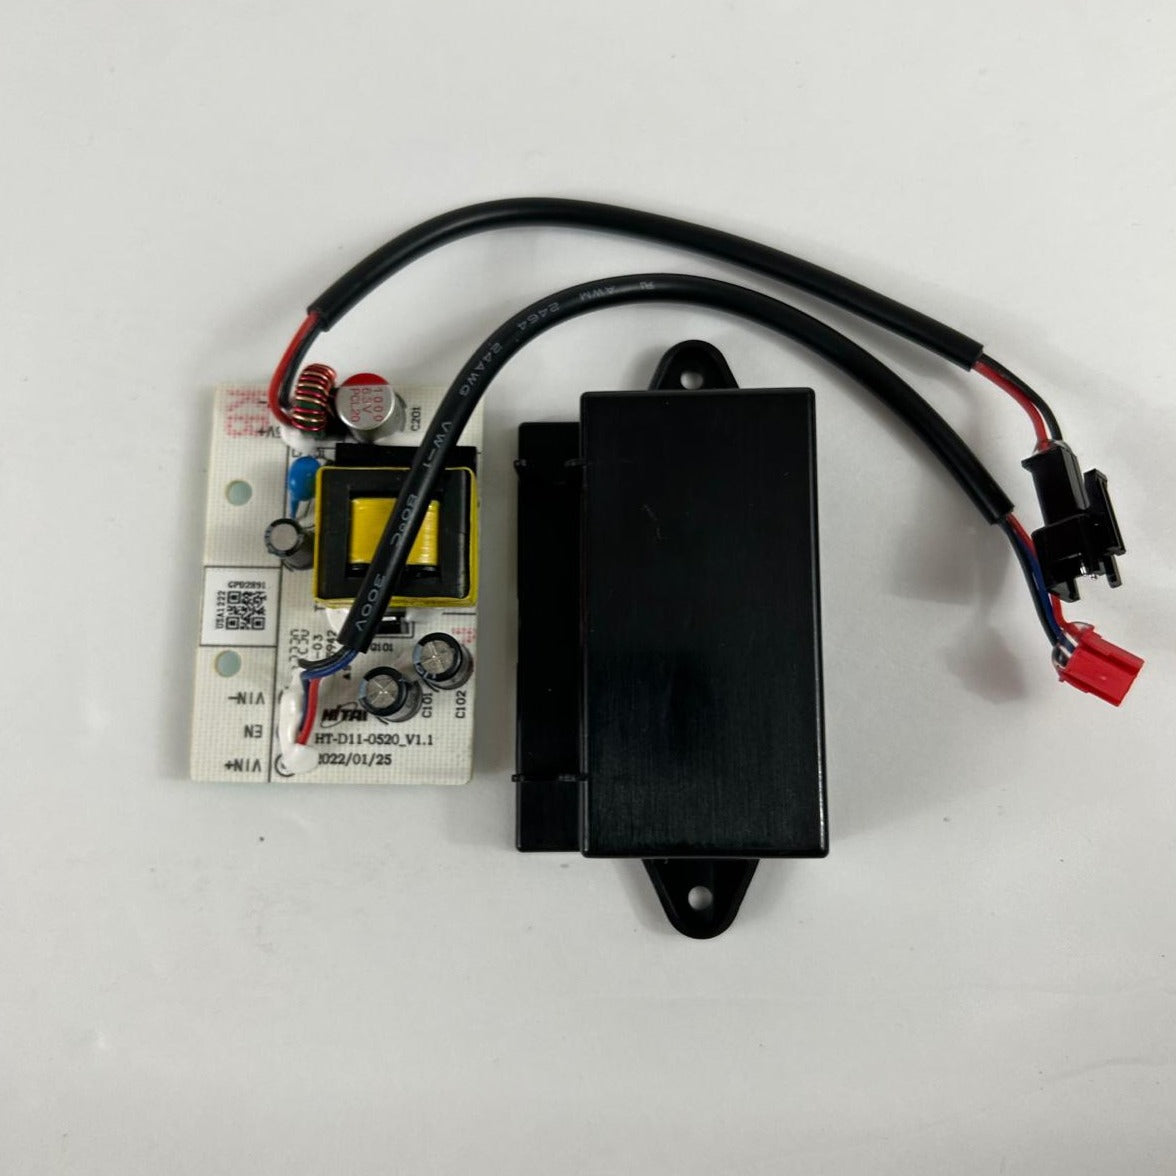 USB adapter for Ninebot P65 Kick Scooters